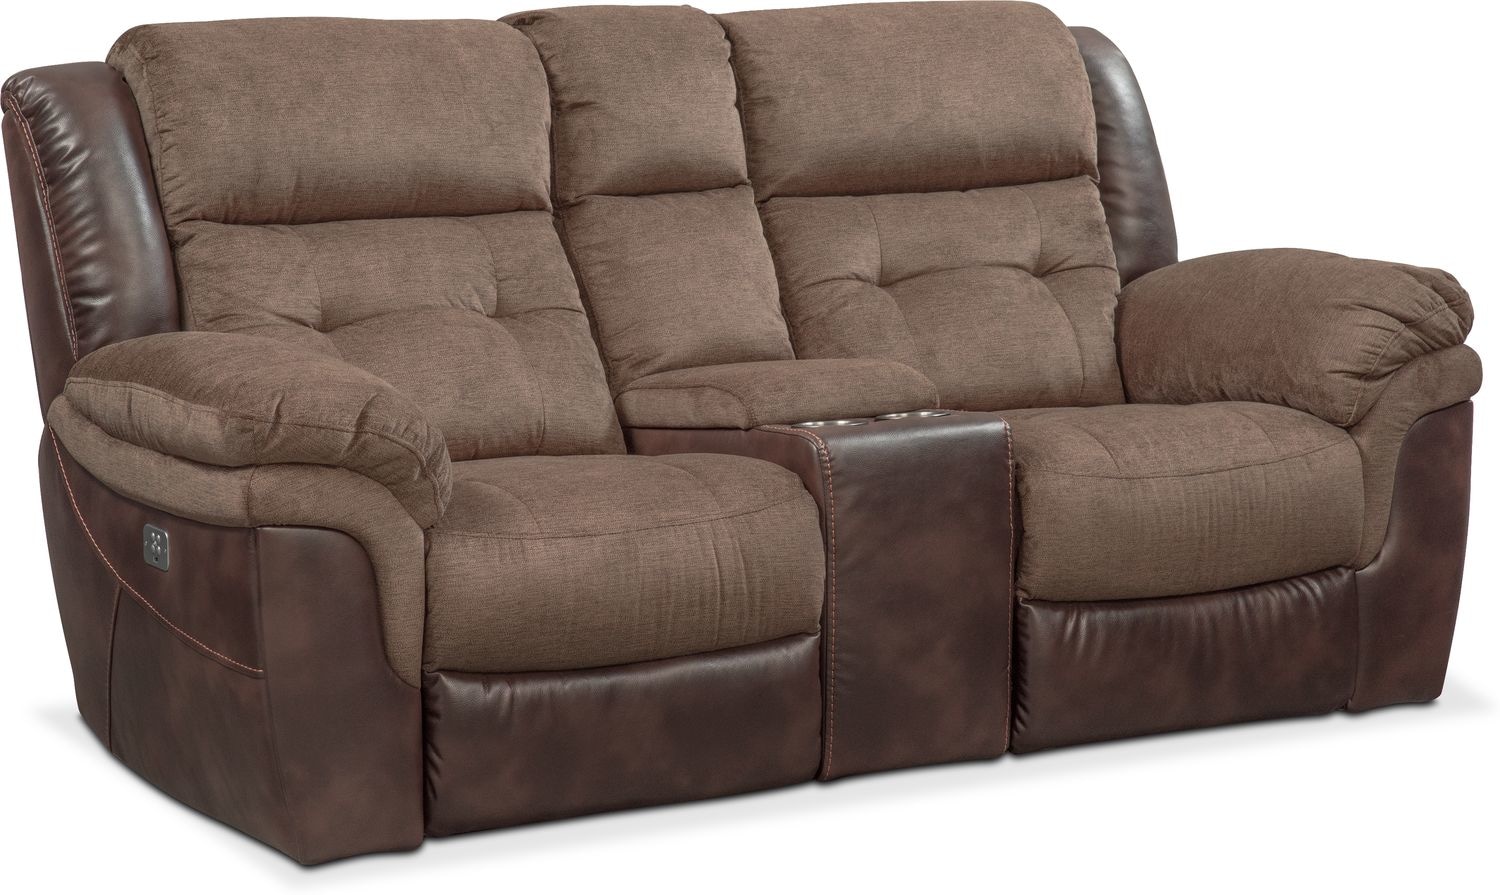 Tacoma Dual Power Reclining Loveseat with Console | Value City